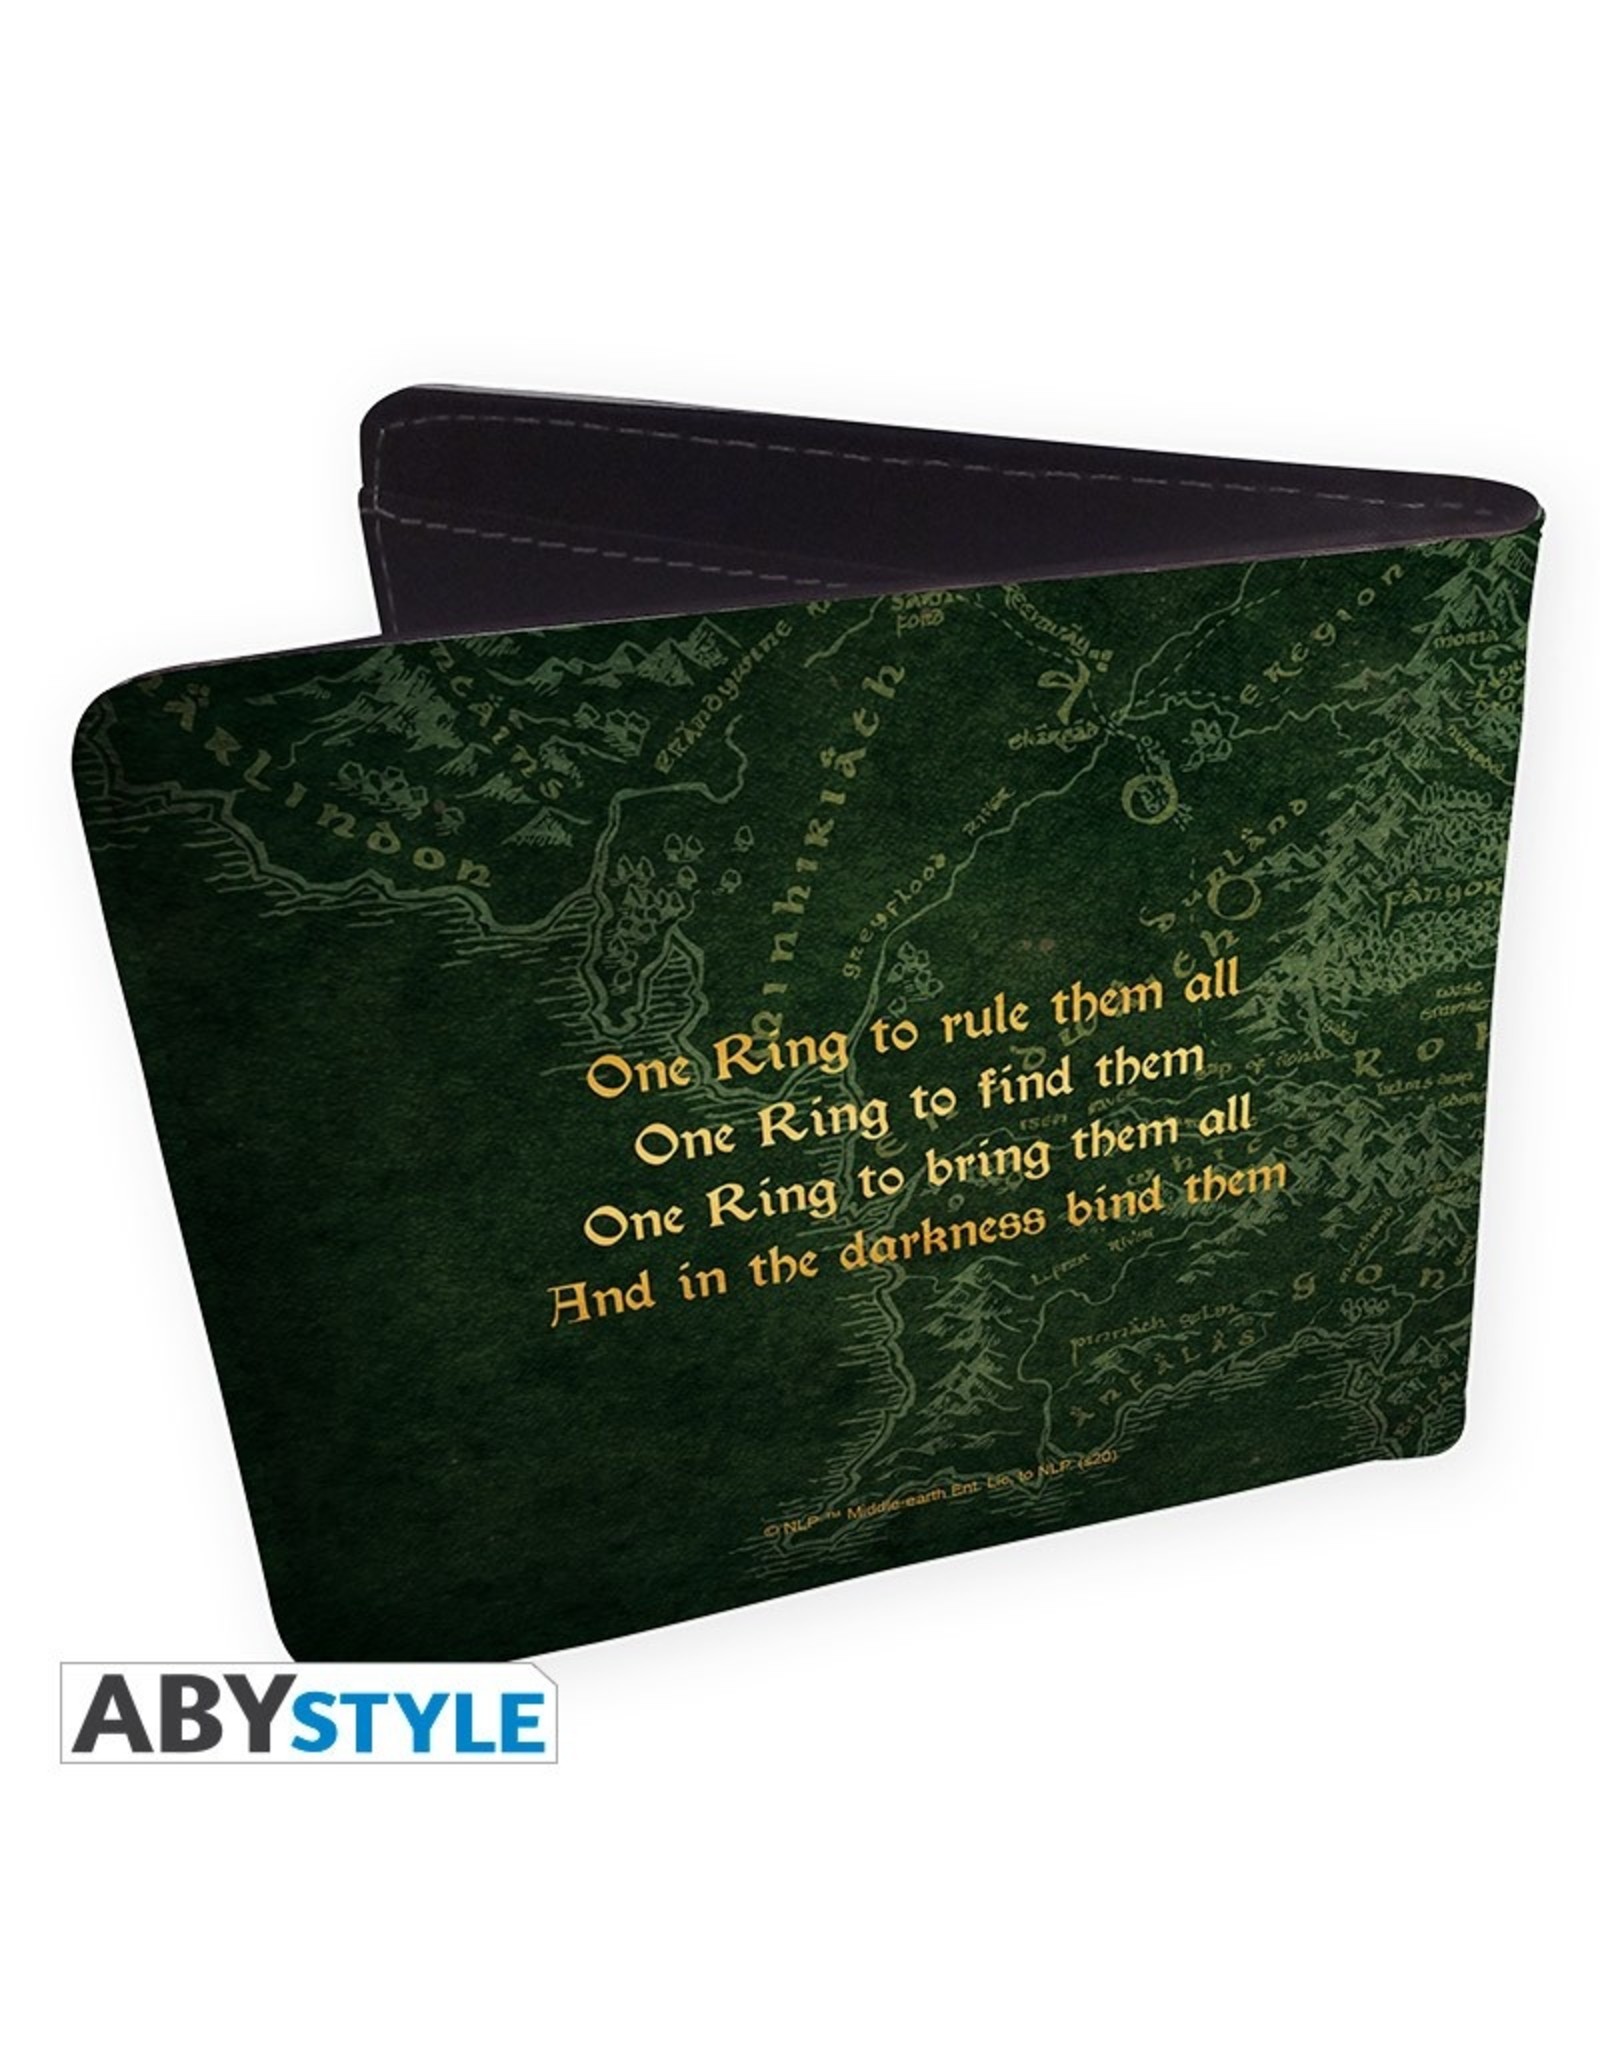 abysse corp Merchandise wallets - Lord of the Rings wallet middle earth